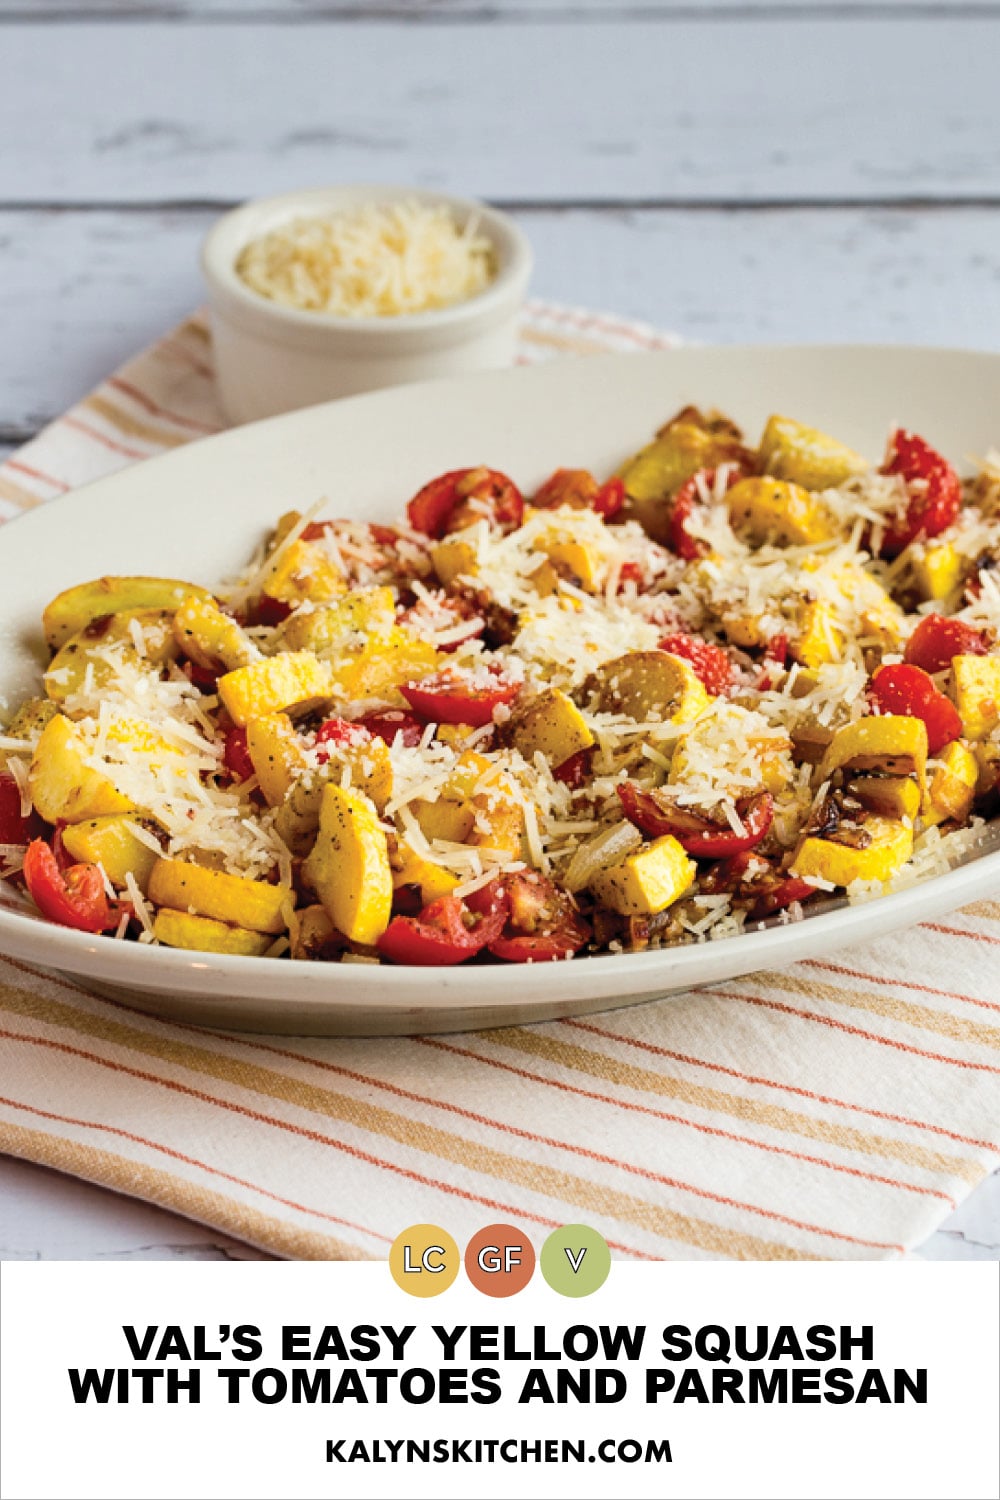 Val's Easy Yellow Squash with Tomatoes and Parmesan